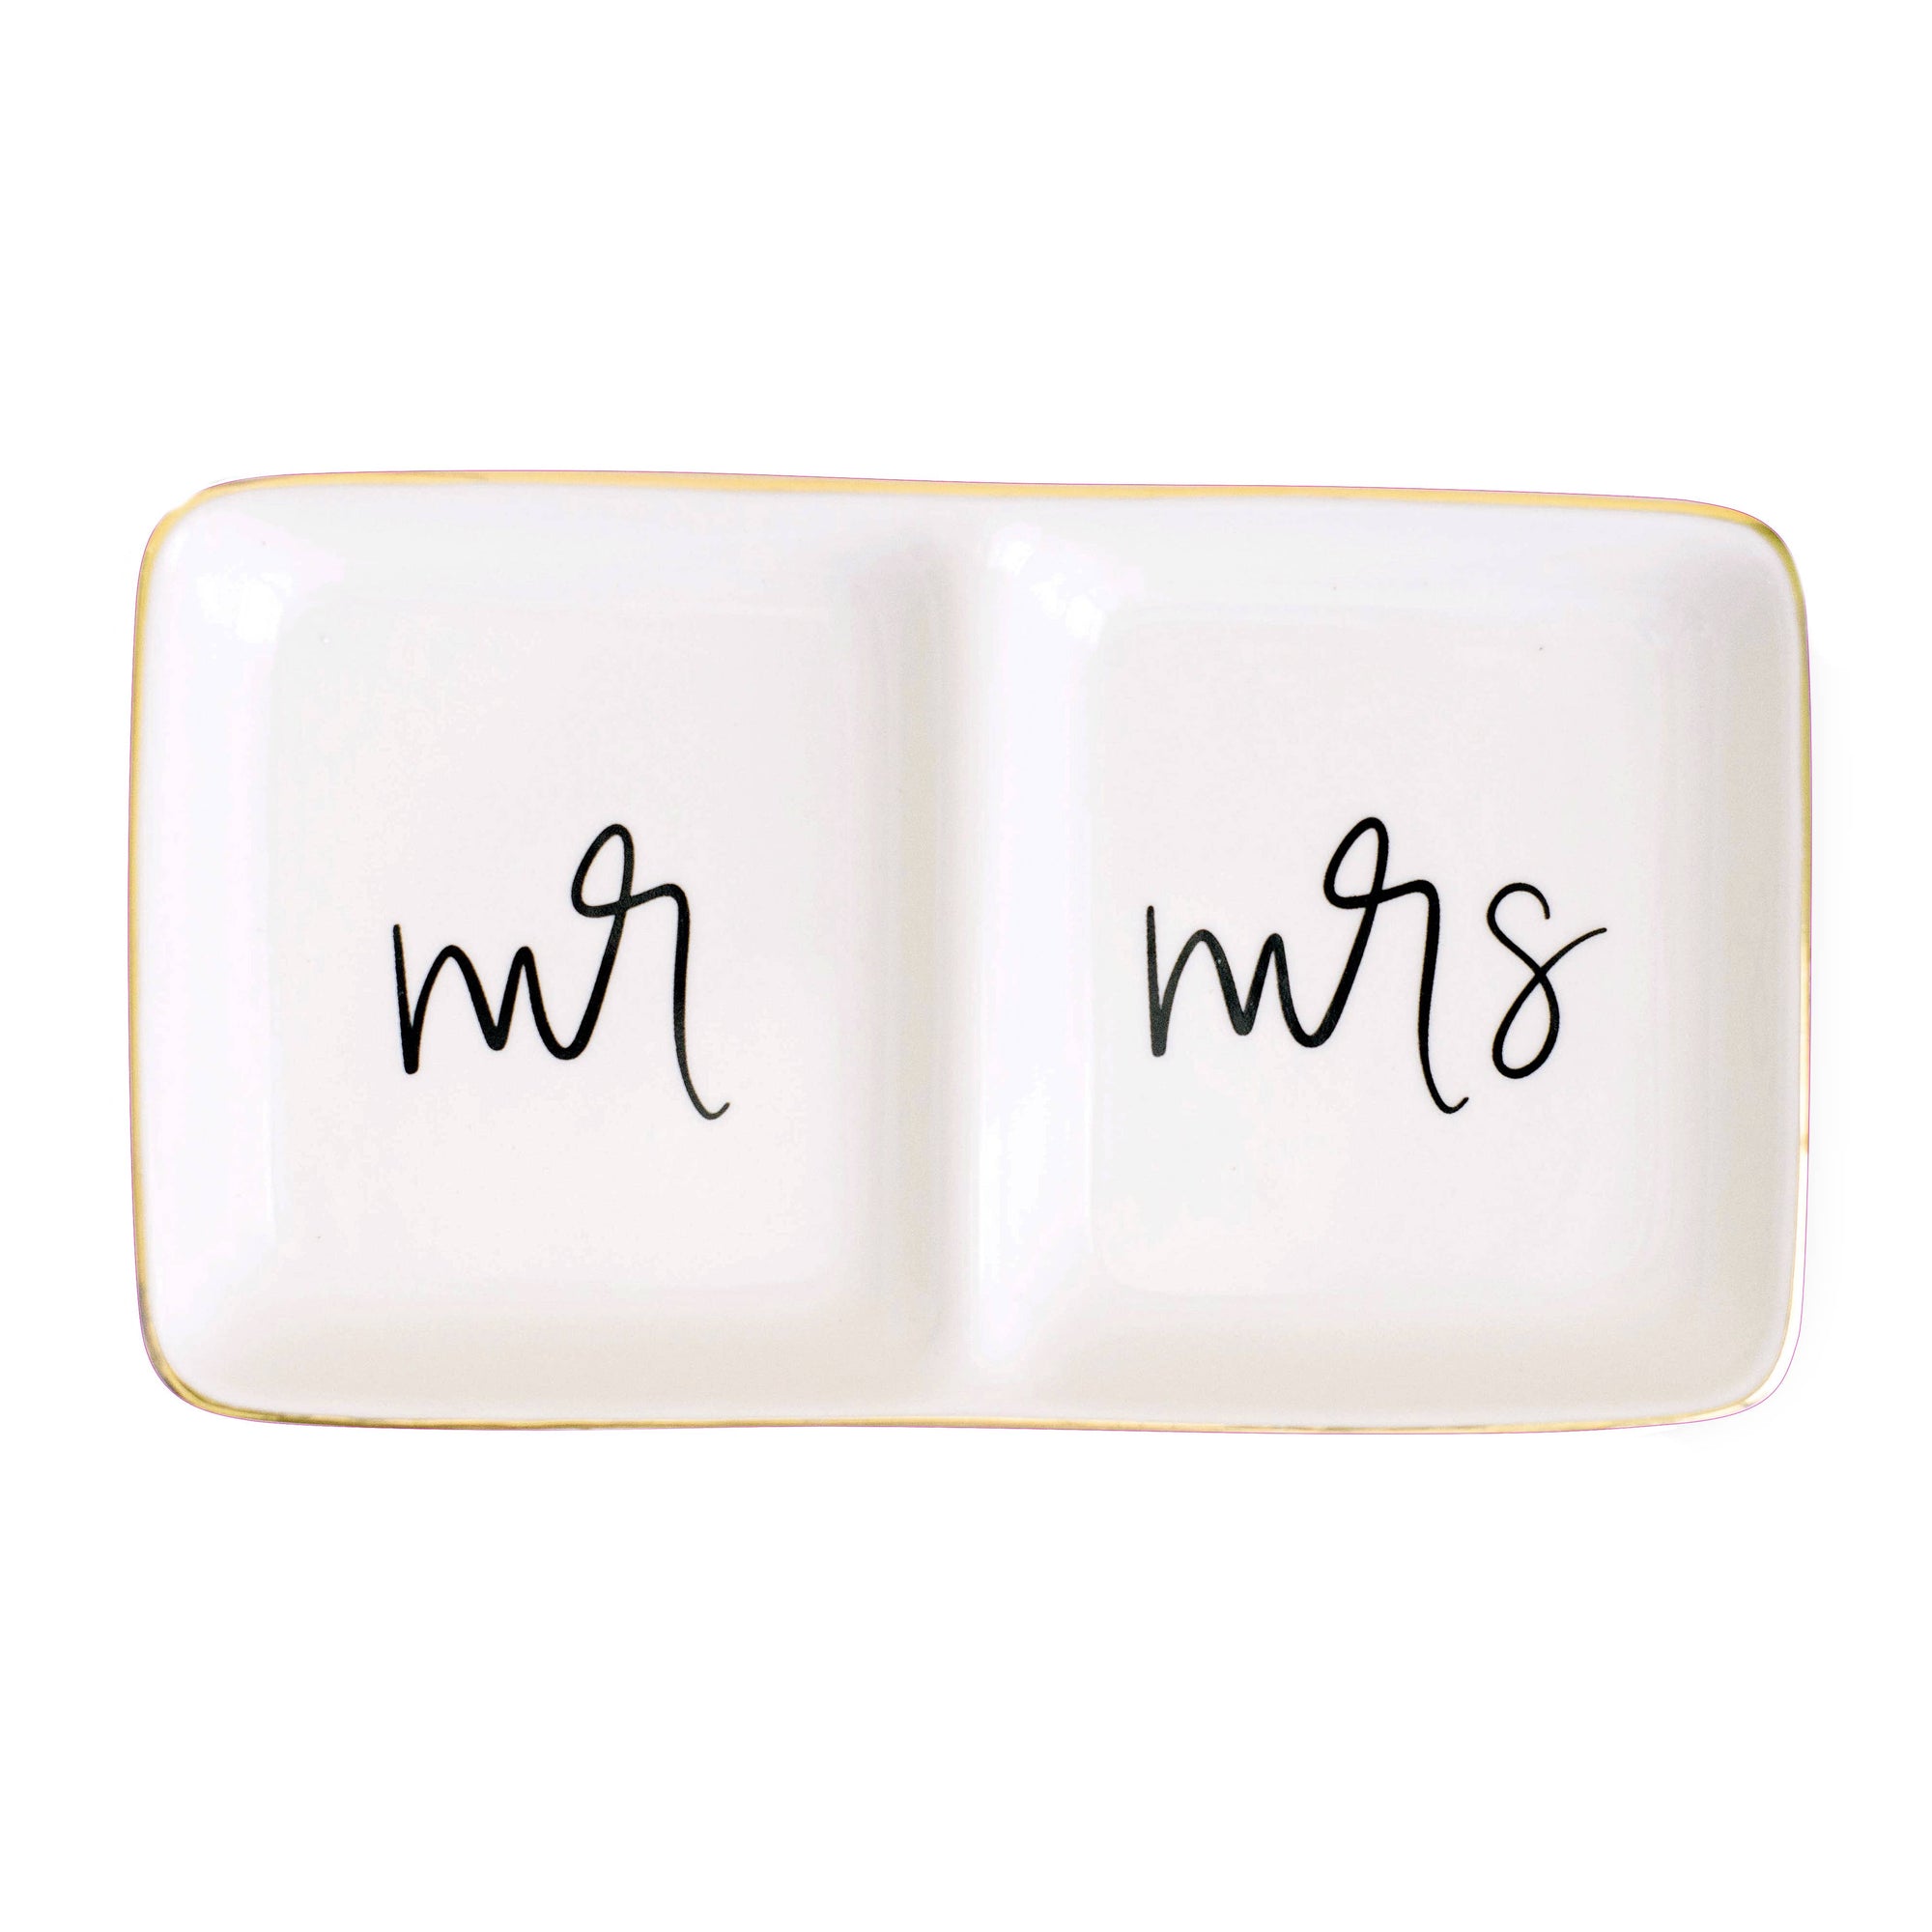 Mr. and Mrs. Jewelry Dish - Home Decor &amp; Gifts